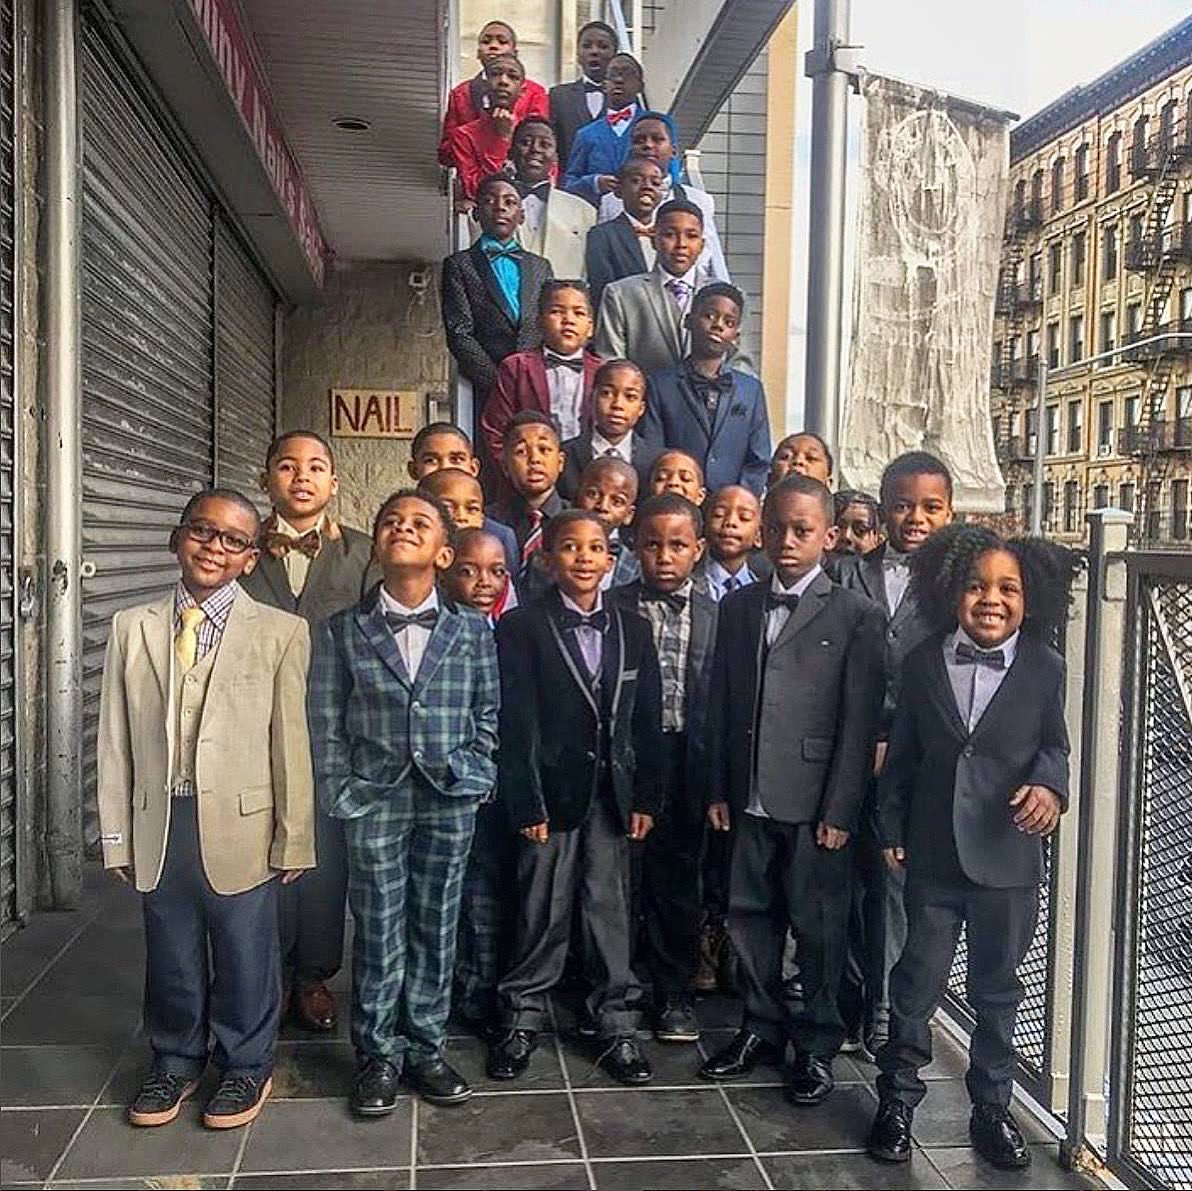 What a beautiful sight! Young Kings of the Take Care of Harlem's Black Boys Wear Suits Too Initiative.  
Photo via: Kelly Snider (founder) 
#blackexcellence #becauseofthemwecan